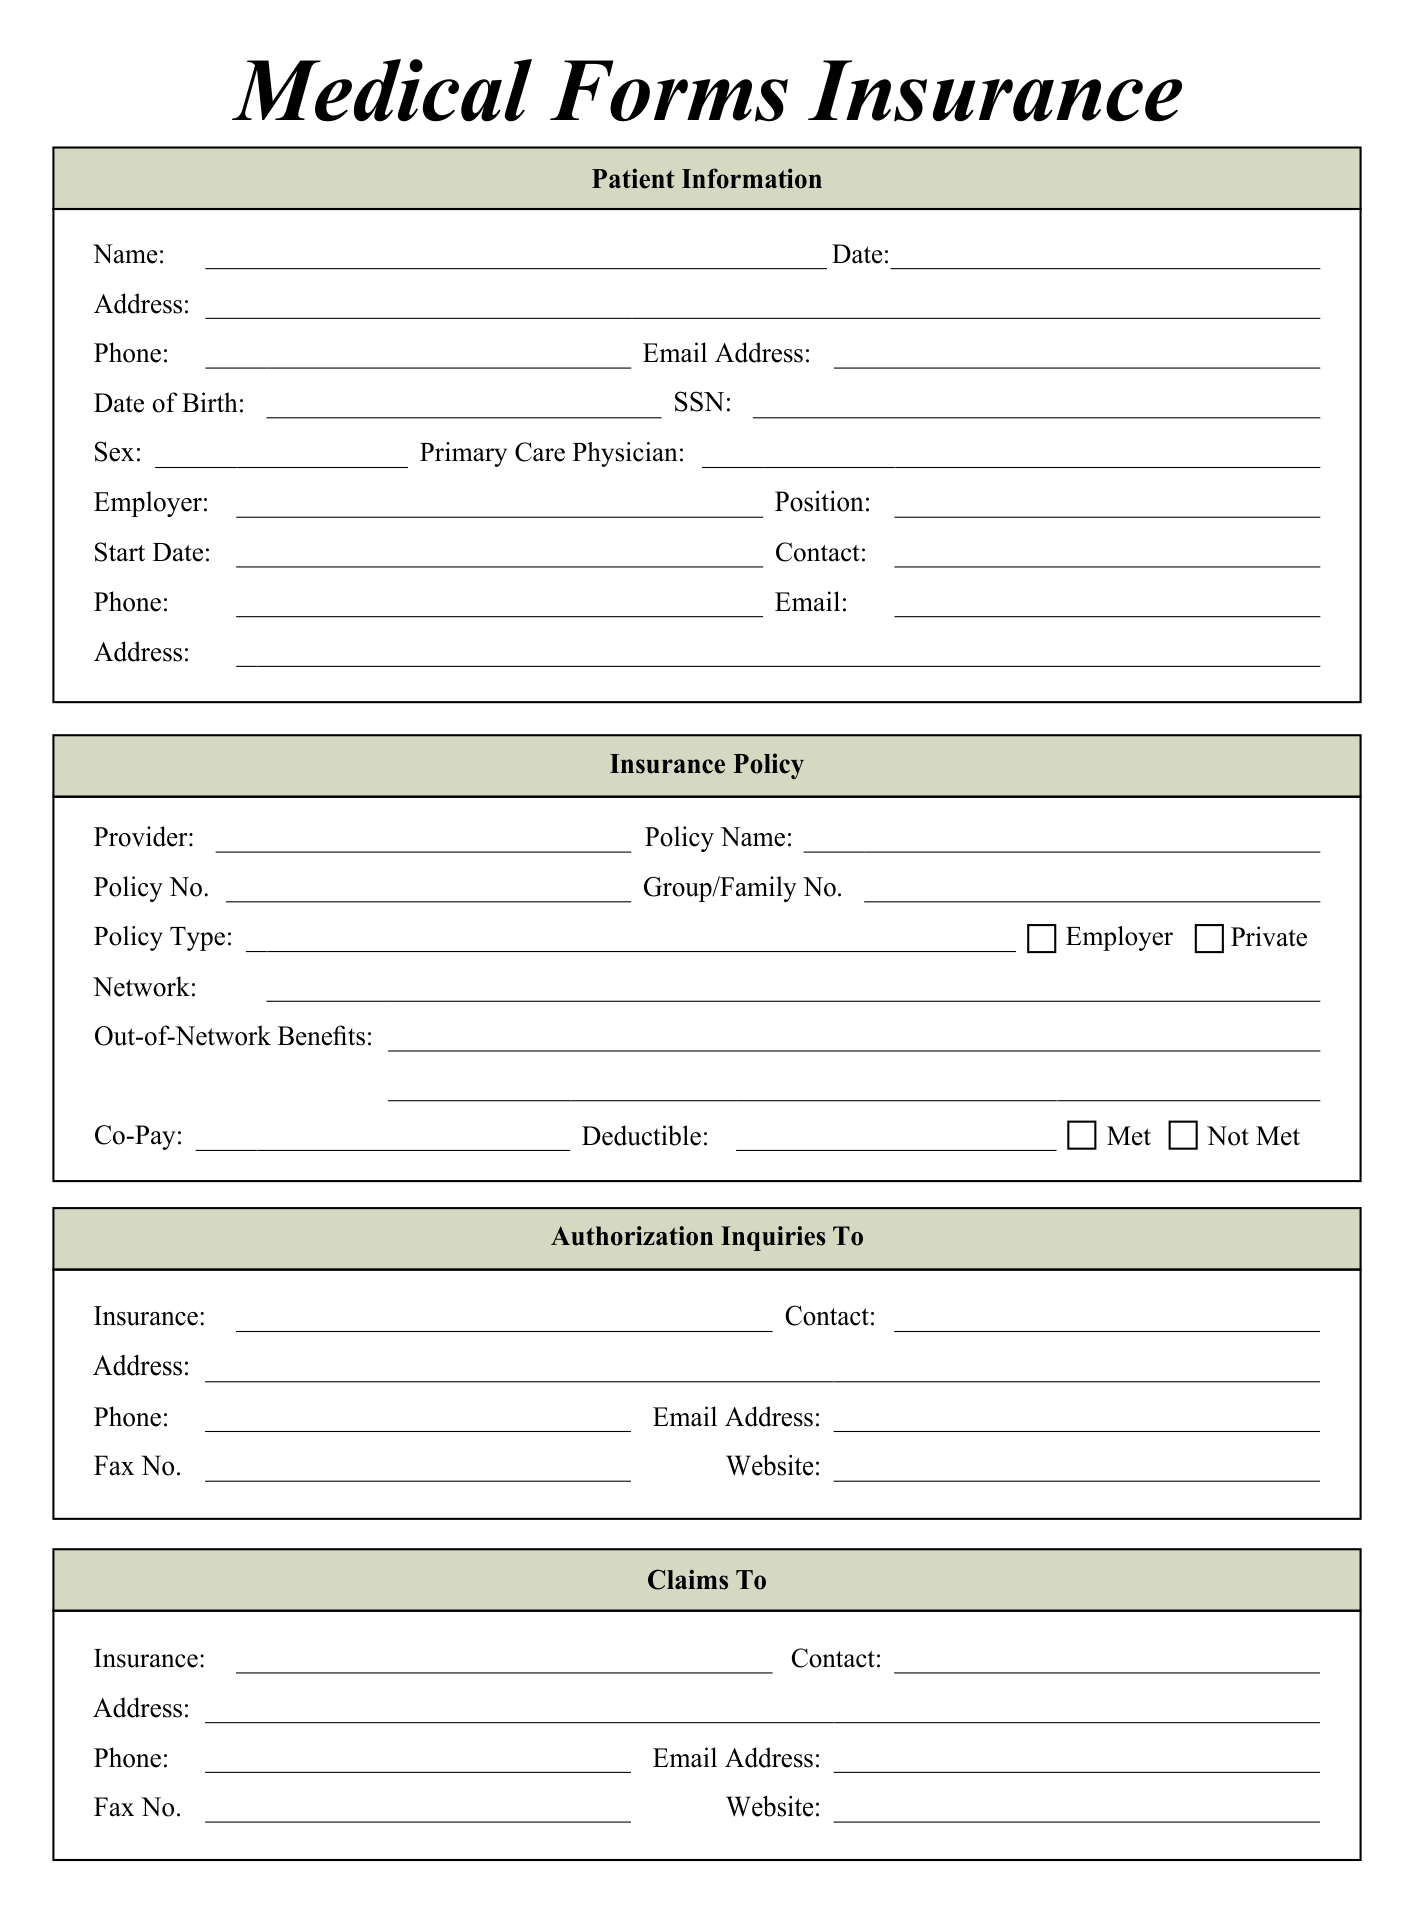 Printable Medical Forms Insurance